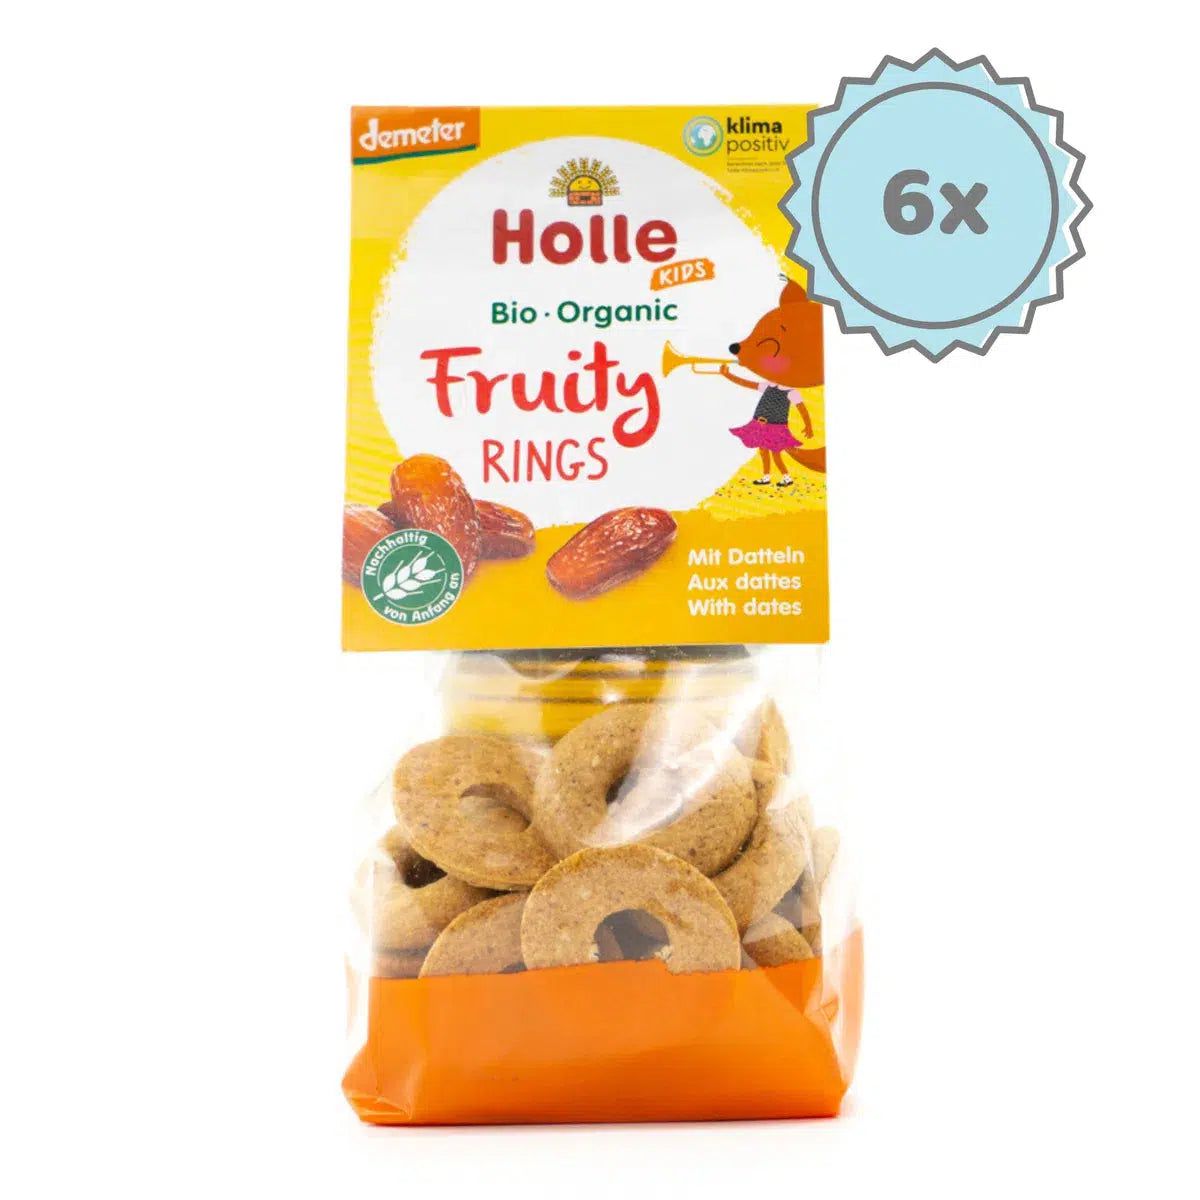 Holle Snack - Dates Fruity Rings (3+ Years) - 6 Packs | Organic's Best Shop